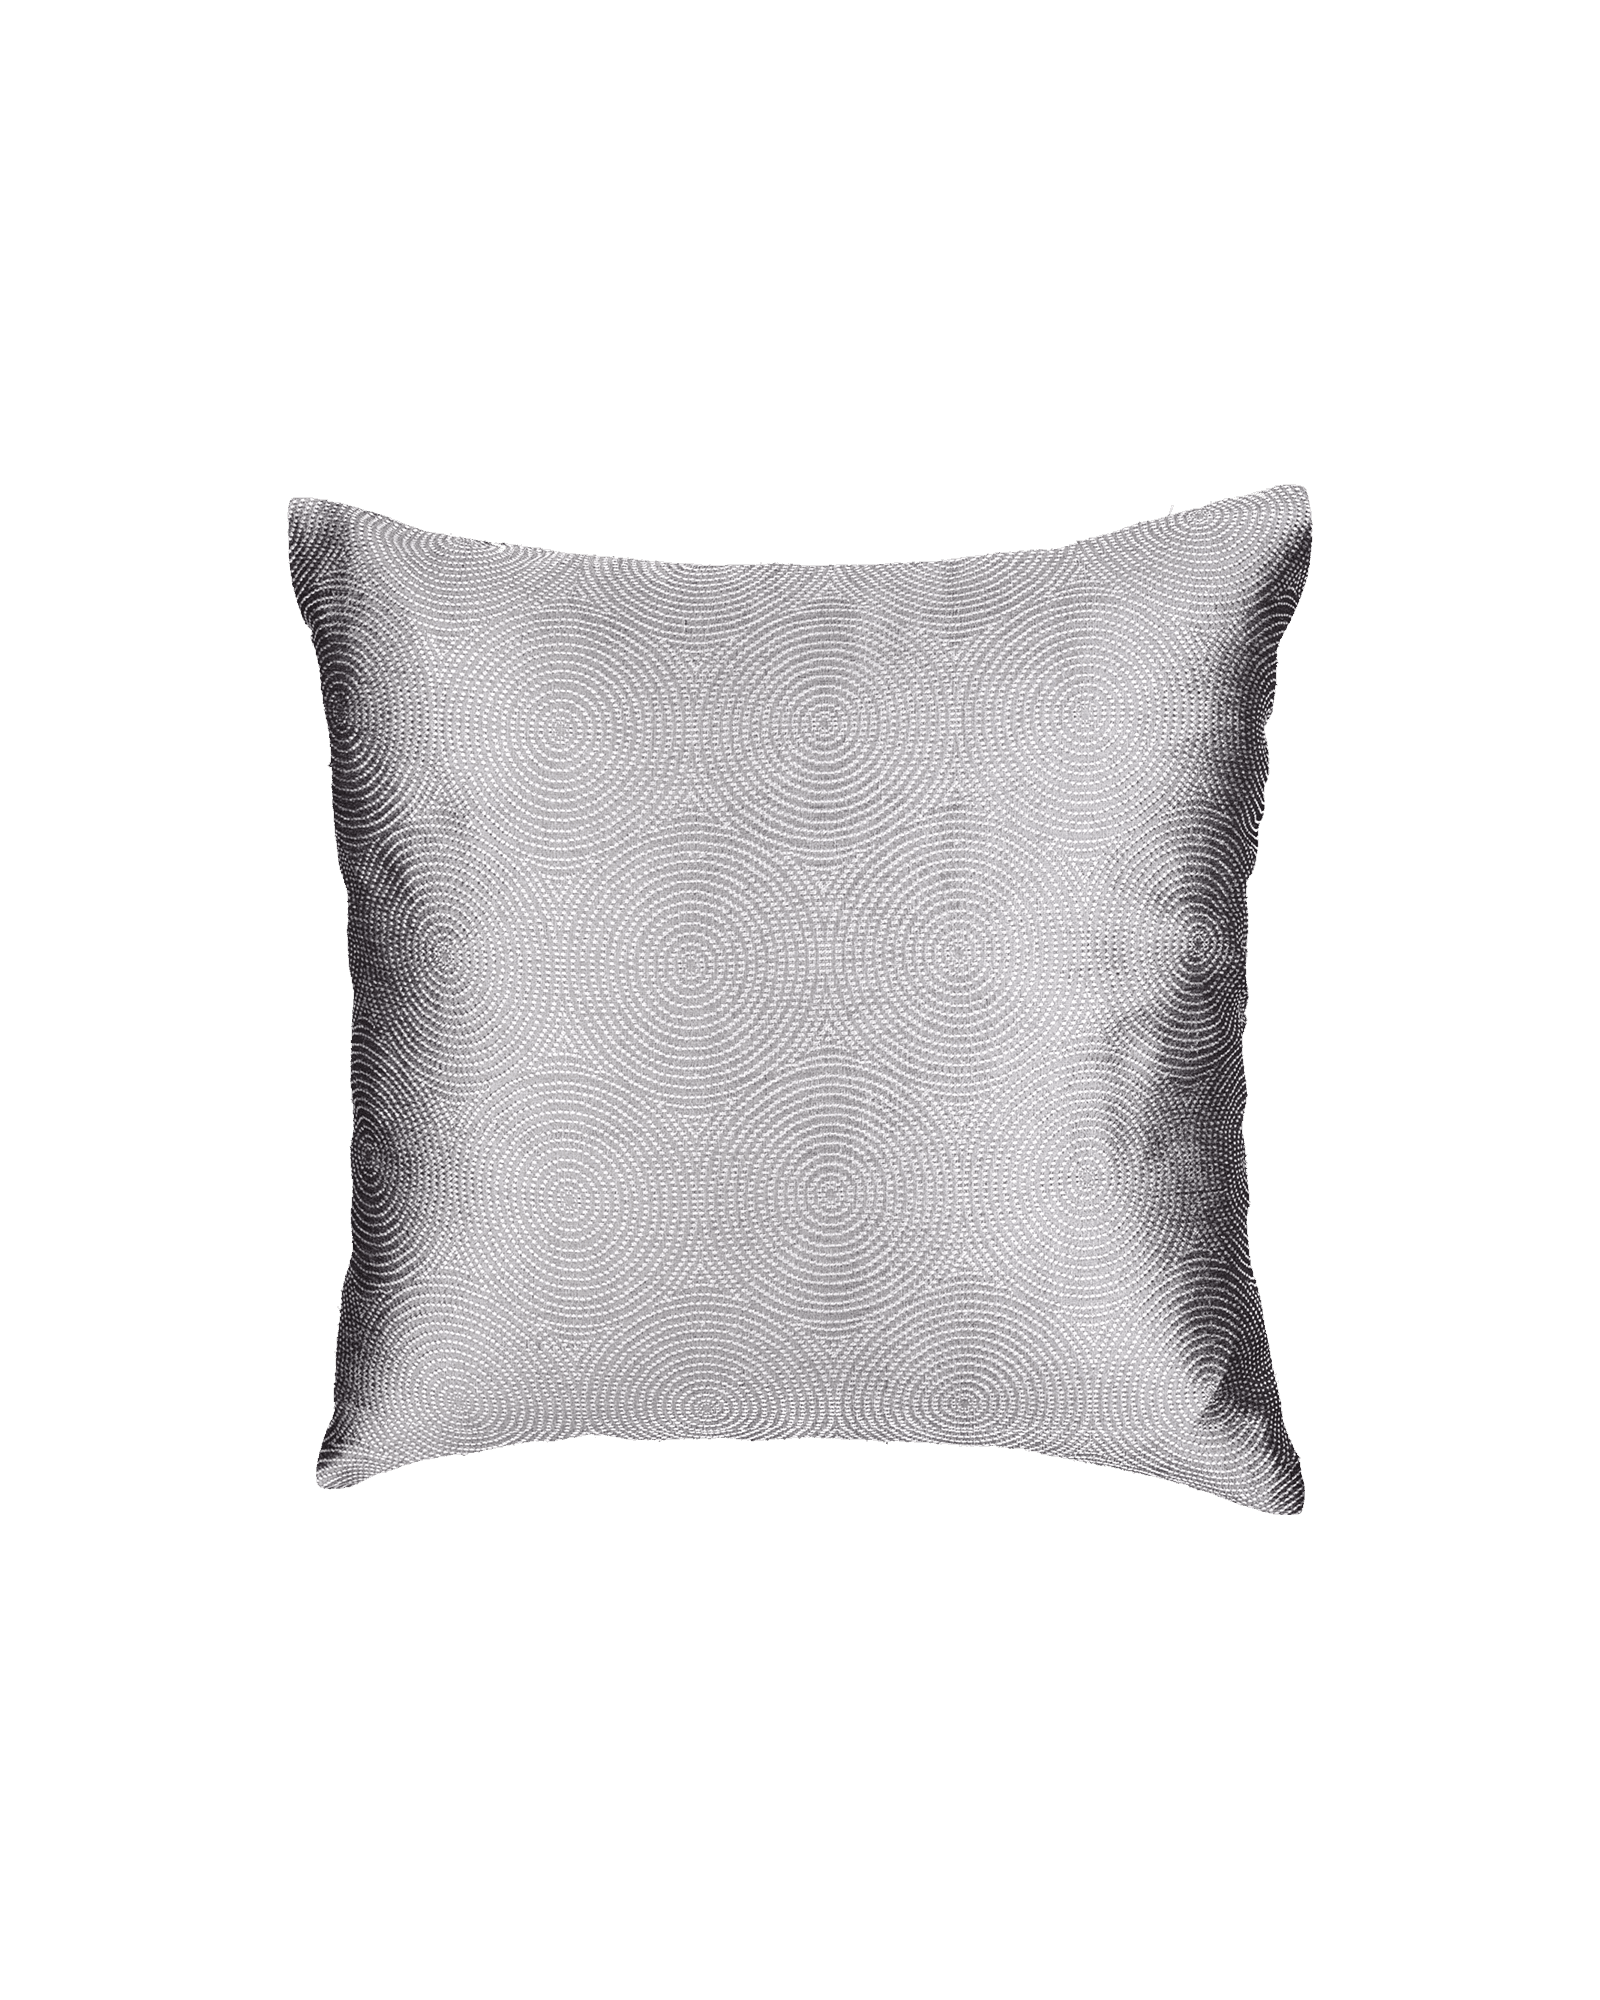 Gray Concentric Circles Poly Dupion Cushion Cover 16" - By HolyWeaves, Benares